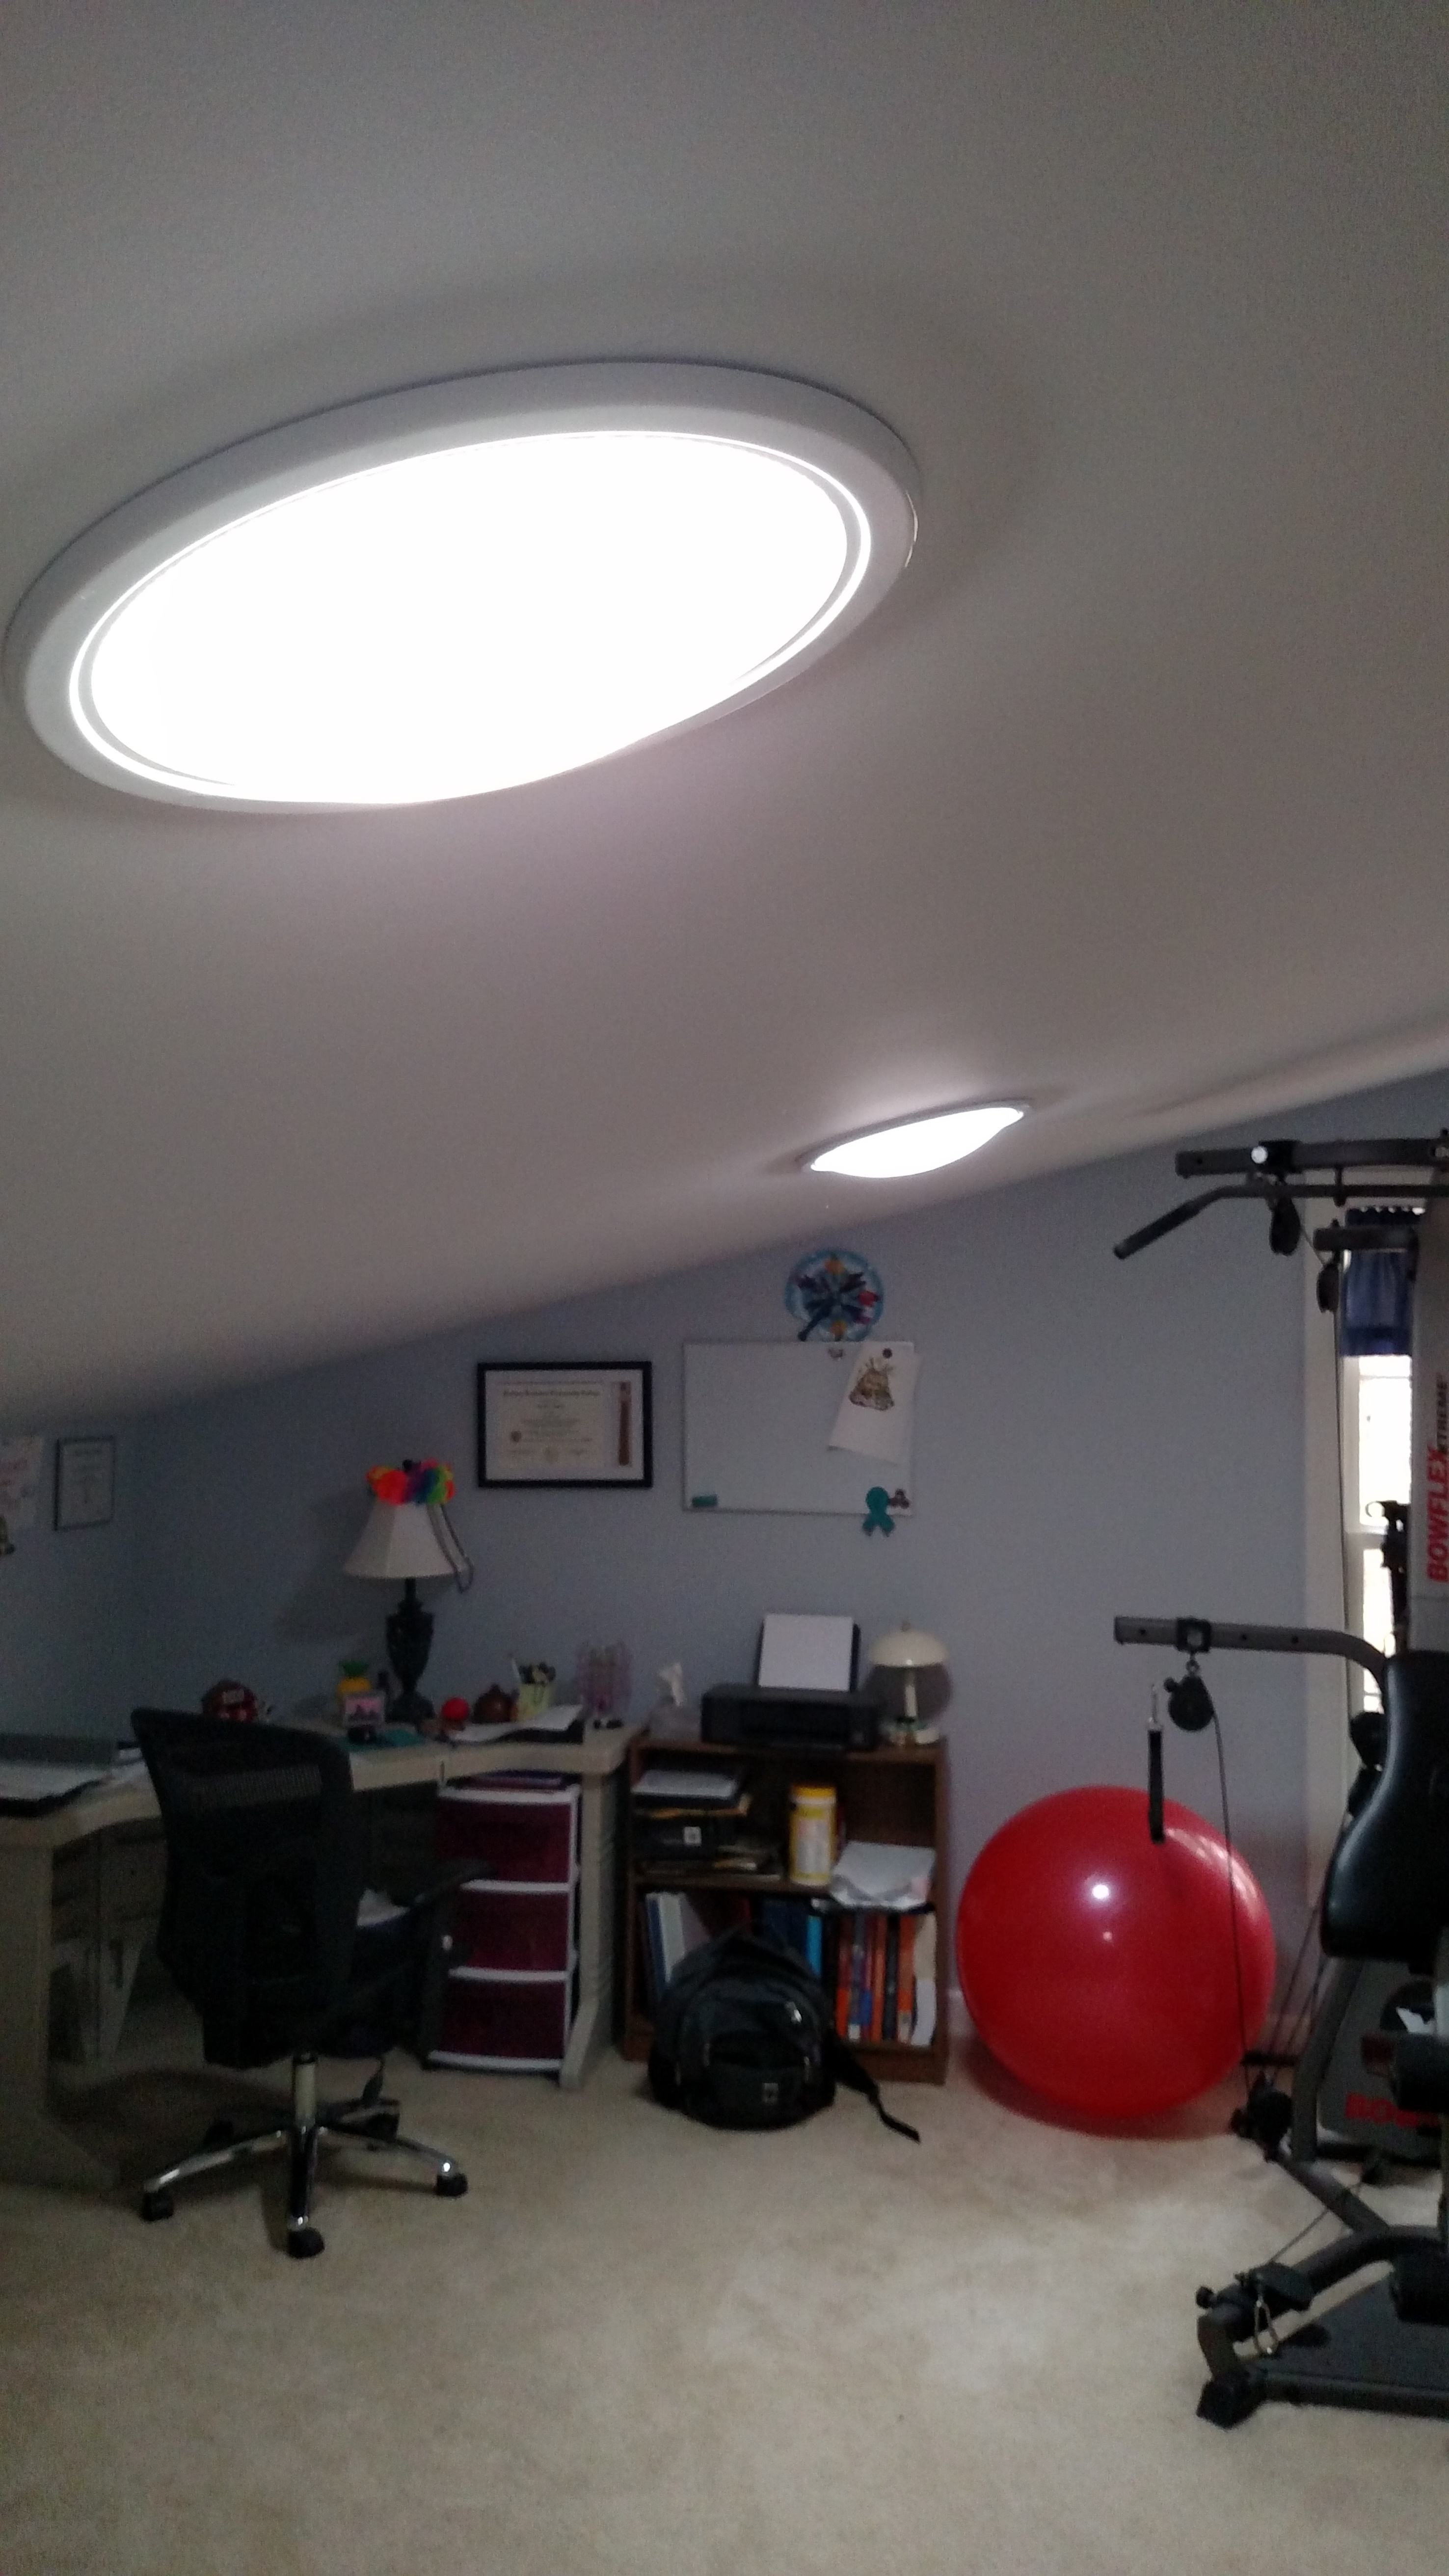 Workout room/office with solar lighting has equipment and desk set-up